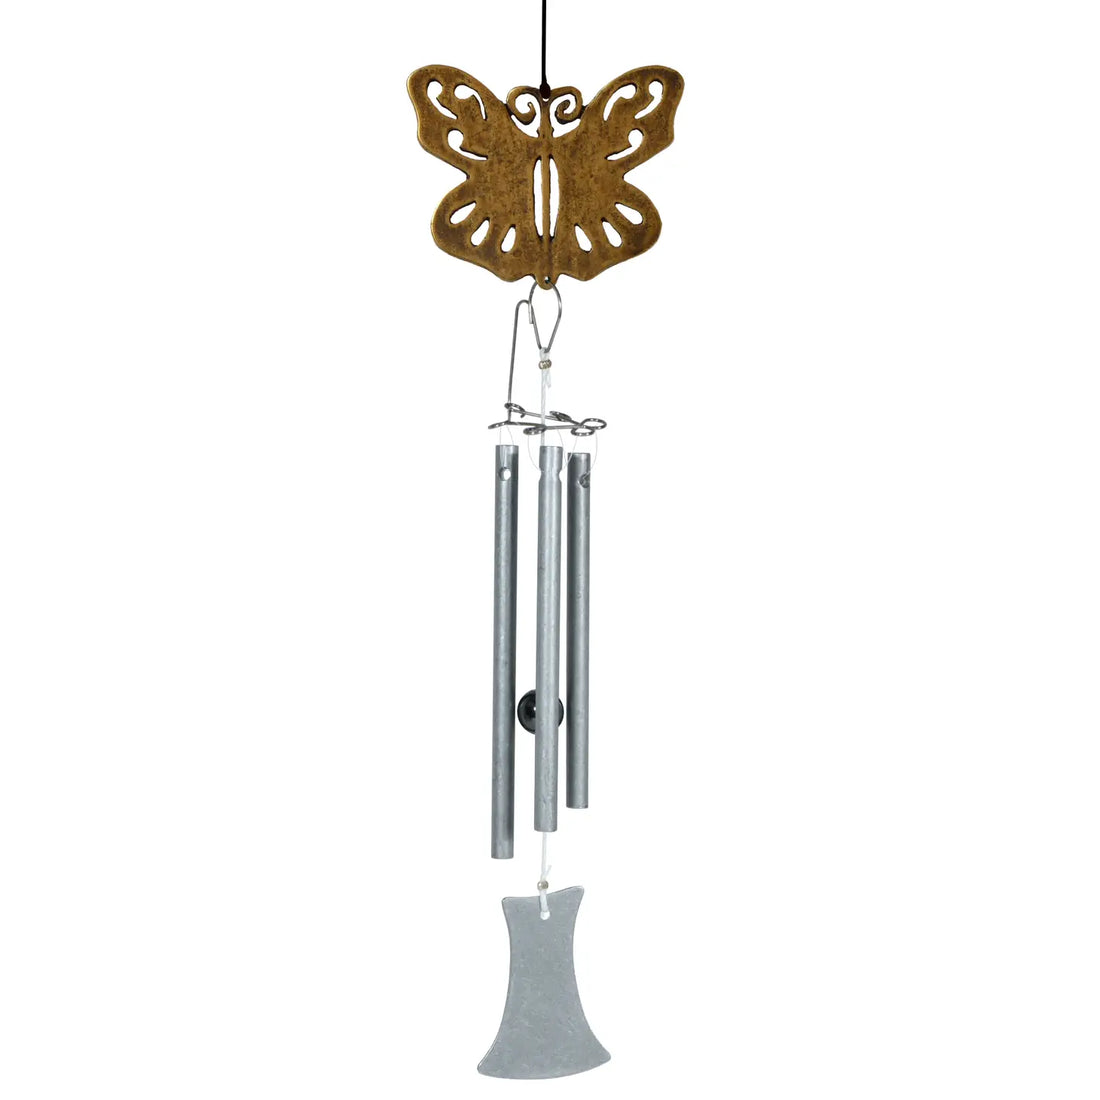 Jacob's Musical Little Piper Chime, Butterfly